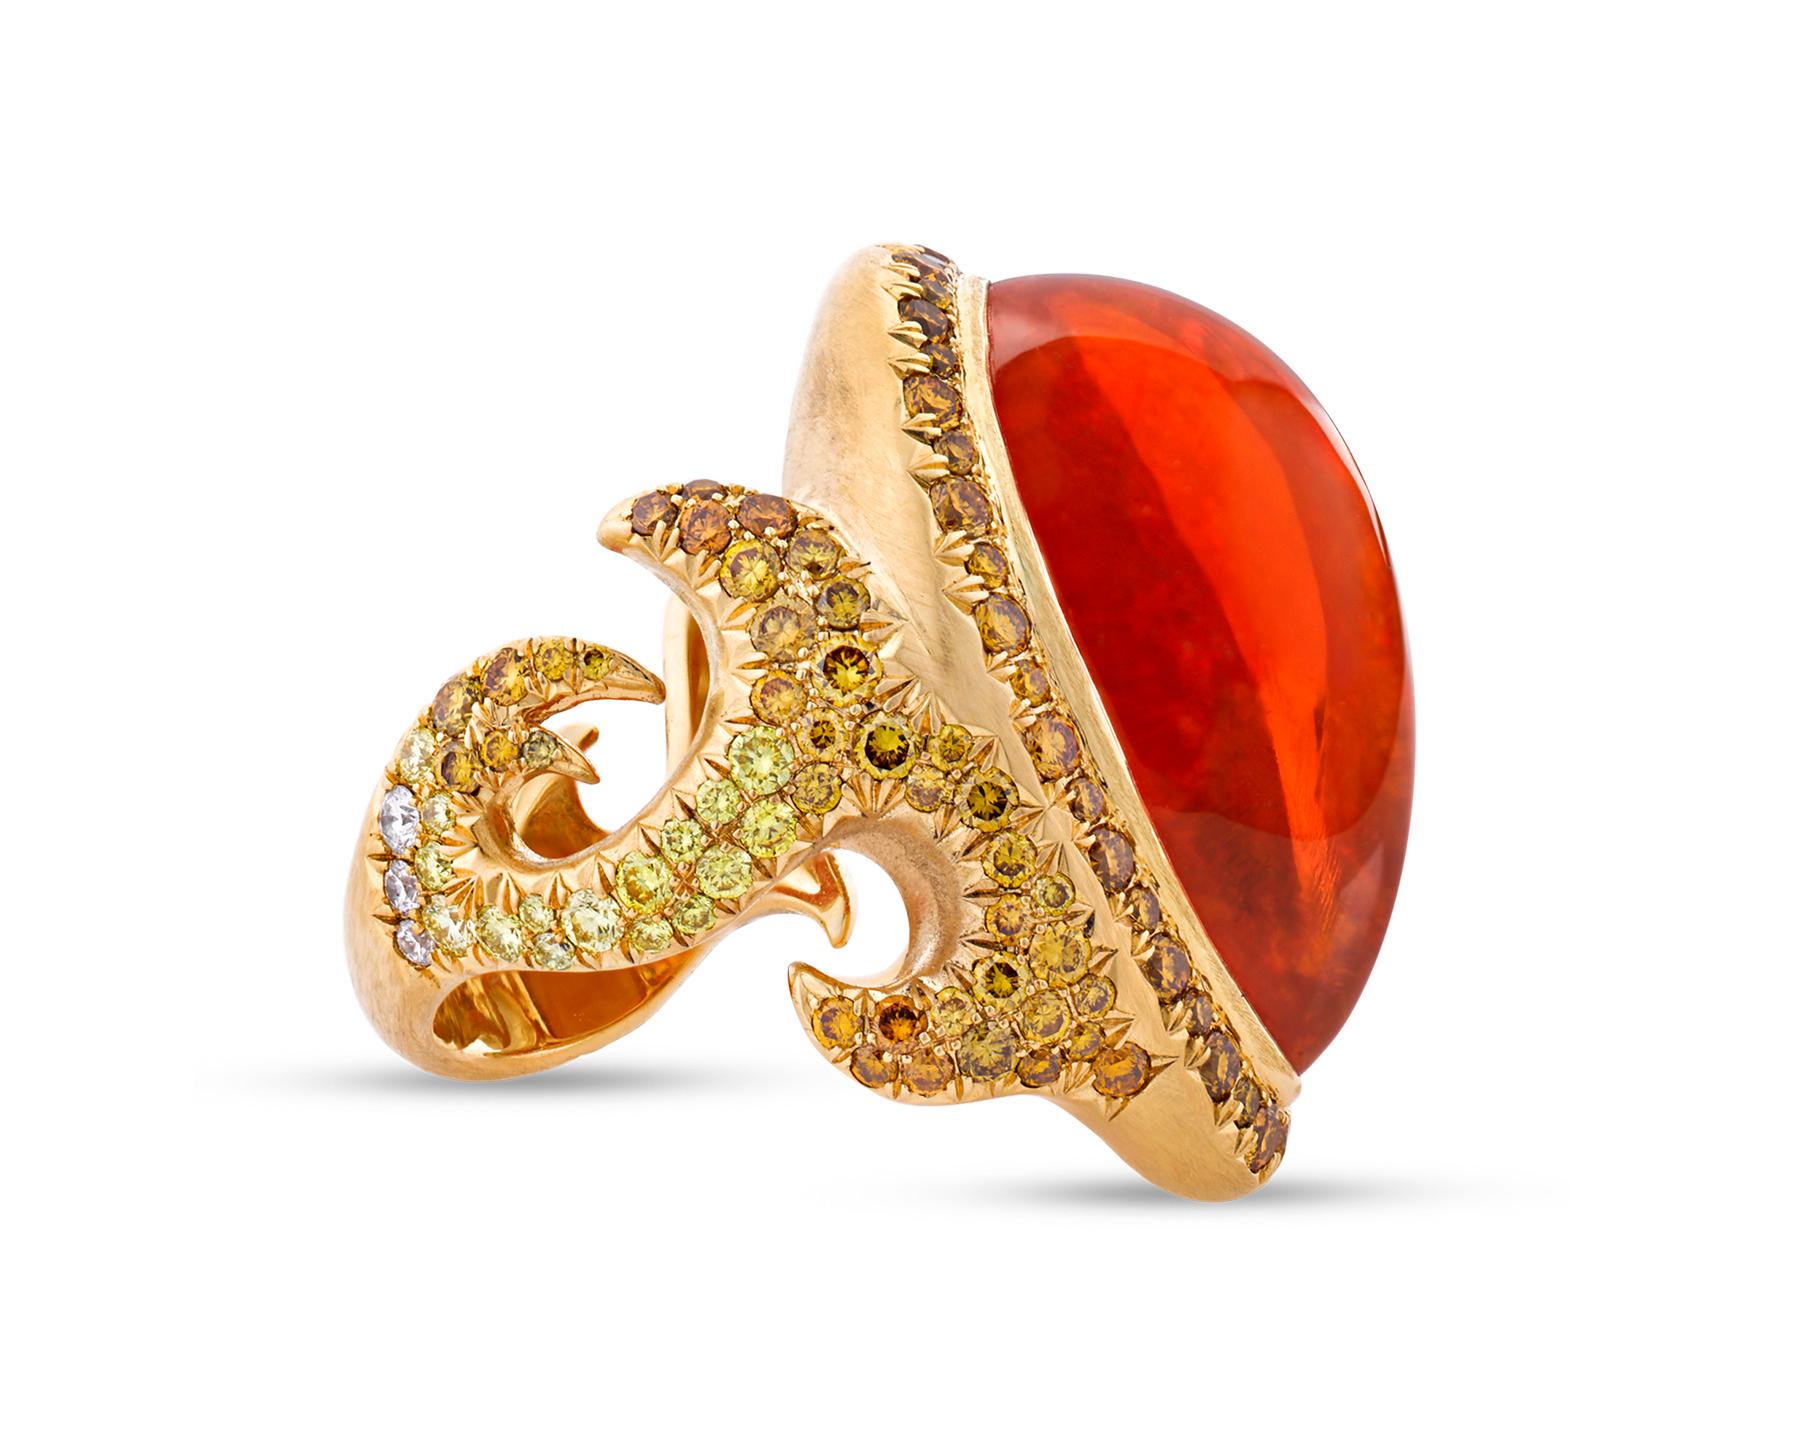 This breathtaking ring boasts a brilliant 24.39-carat fire opal cabochon centerpiece displayed in a rare and beautiful design. An eye-catching array of 157 stunning melee diamonds weighing 2.74 carats total accent this vibrant orange opal. Crafted